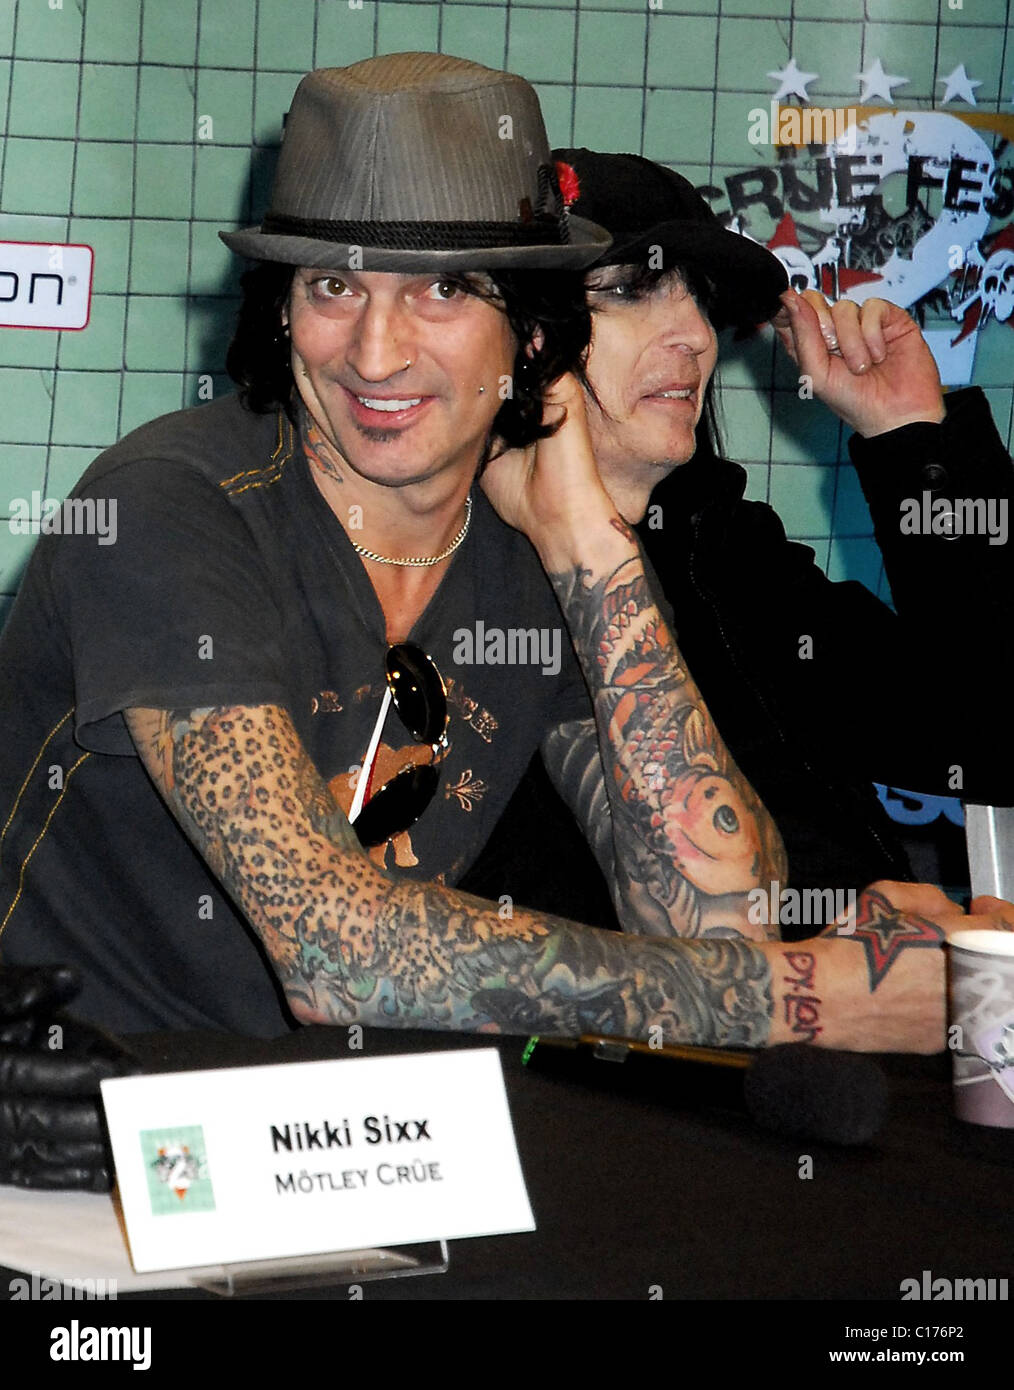 How old was mick mars when he joined motley crue Tommy Lee And Mick Mars Of Motley Crue Attend The Crue Fest 2 Line Up Press Conference At Fuse Studios New York City Usa Stock Photo Alamy